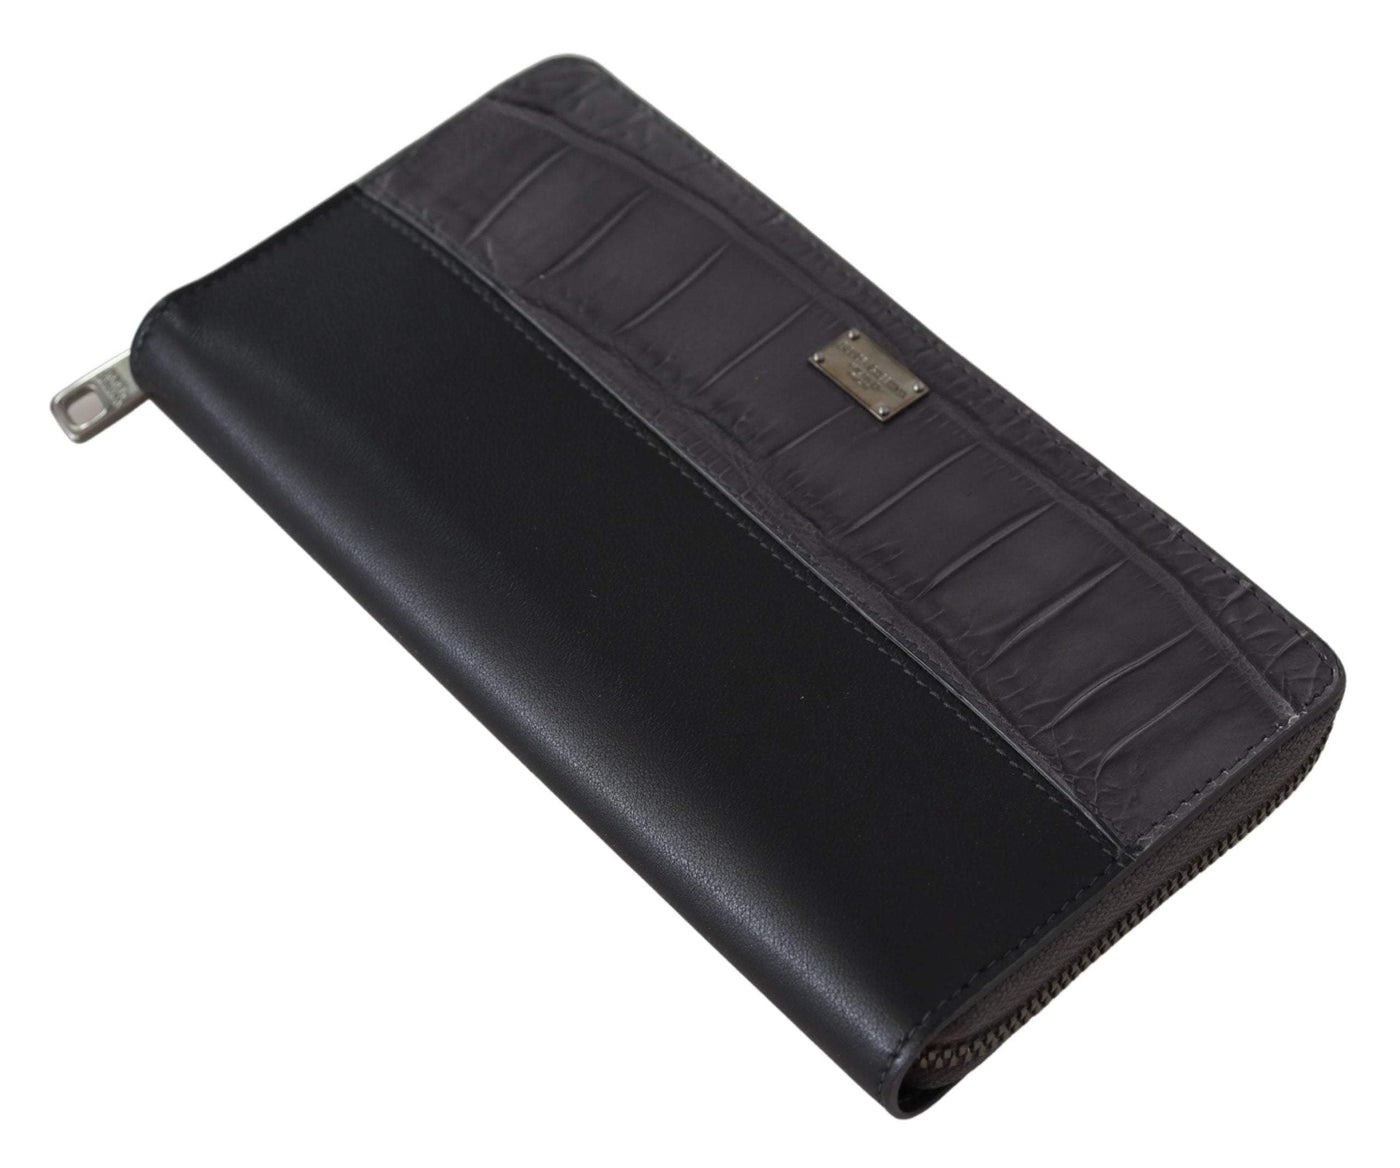 Dolce & Gabbana Black Zip Around Continental Clutch Leather Wallet #men, Black and Gray, Dolce & Gabbana, feed-agegroup-adult, feed-color-Black, feed-gender-male, Wallets - Men - Bags at SEYMAYKA